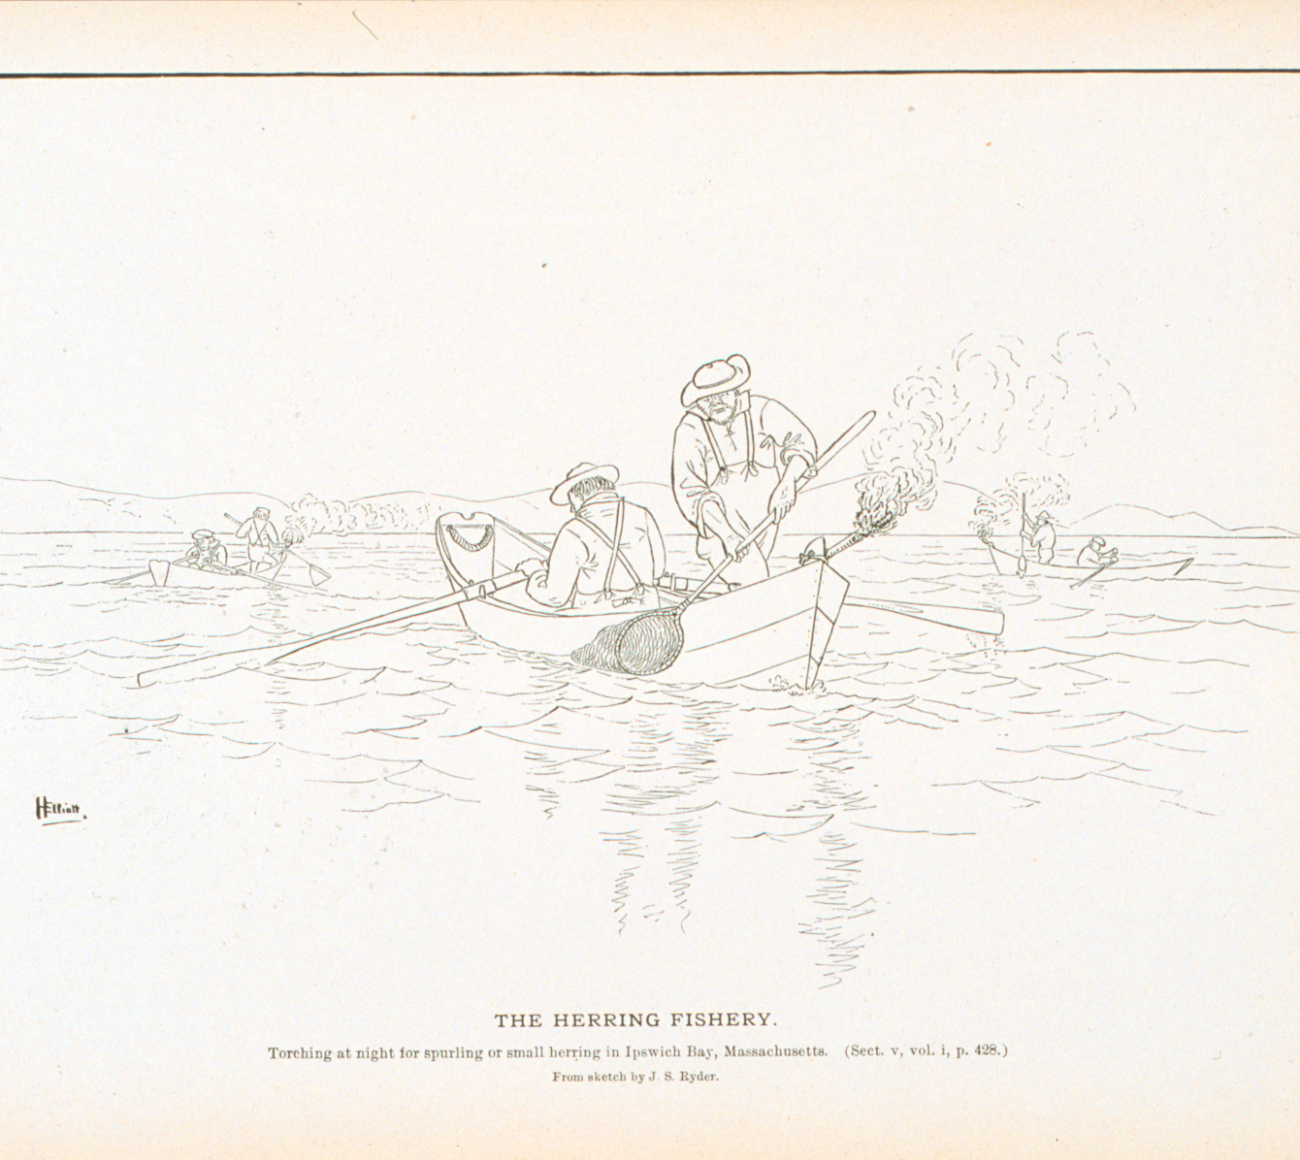 Torching at night for spurling or small herring in Ipswich Bay, MassachusettsFrom sketch by J